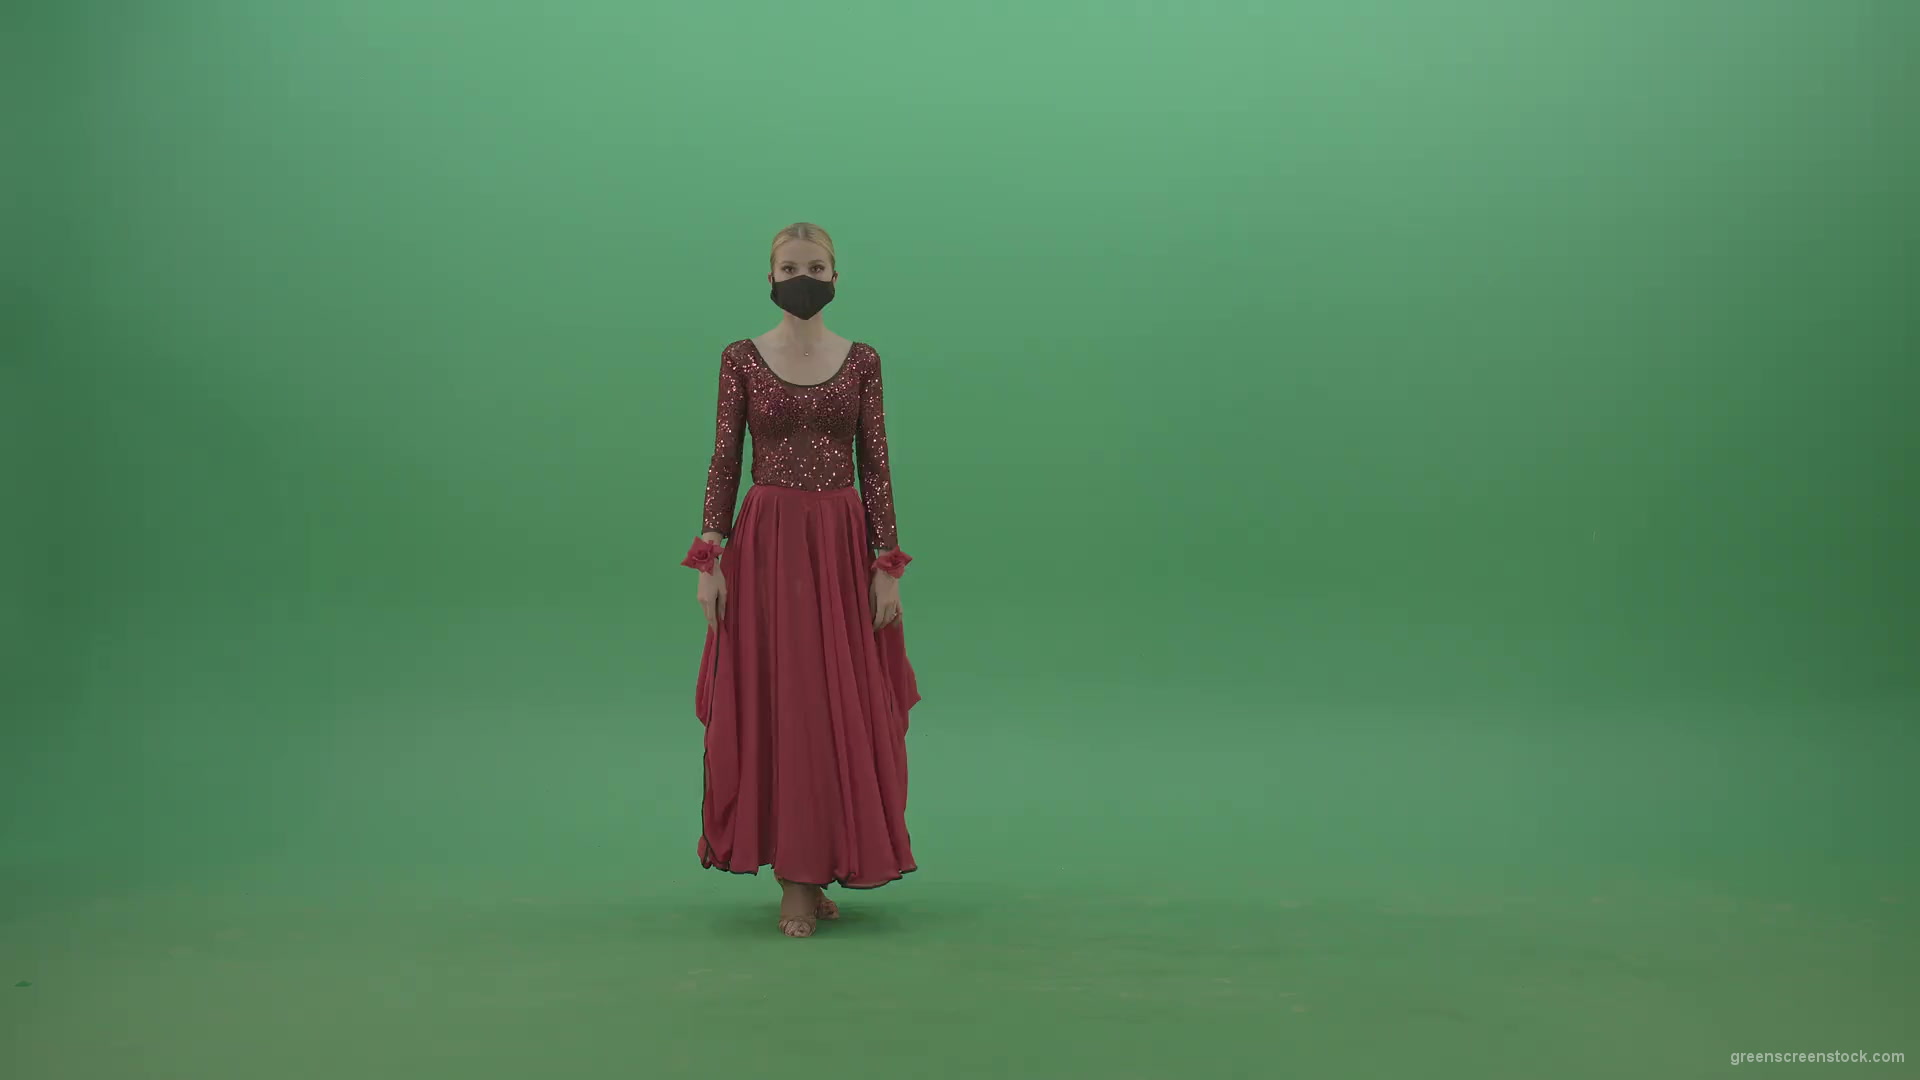 Blonde-Girl-in-red-Flamenco-Dress-makes-spinning-bowing-isolated-on-green-screen-4K-Video-Footage-1920_001 Green Screen Stock